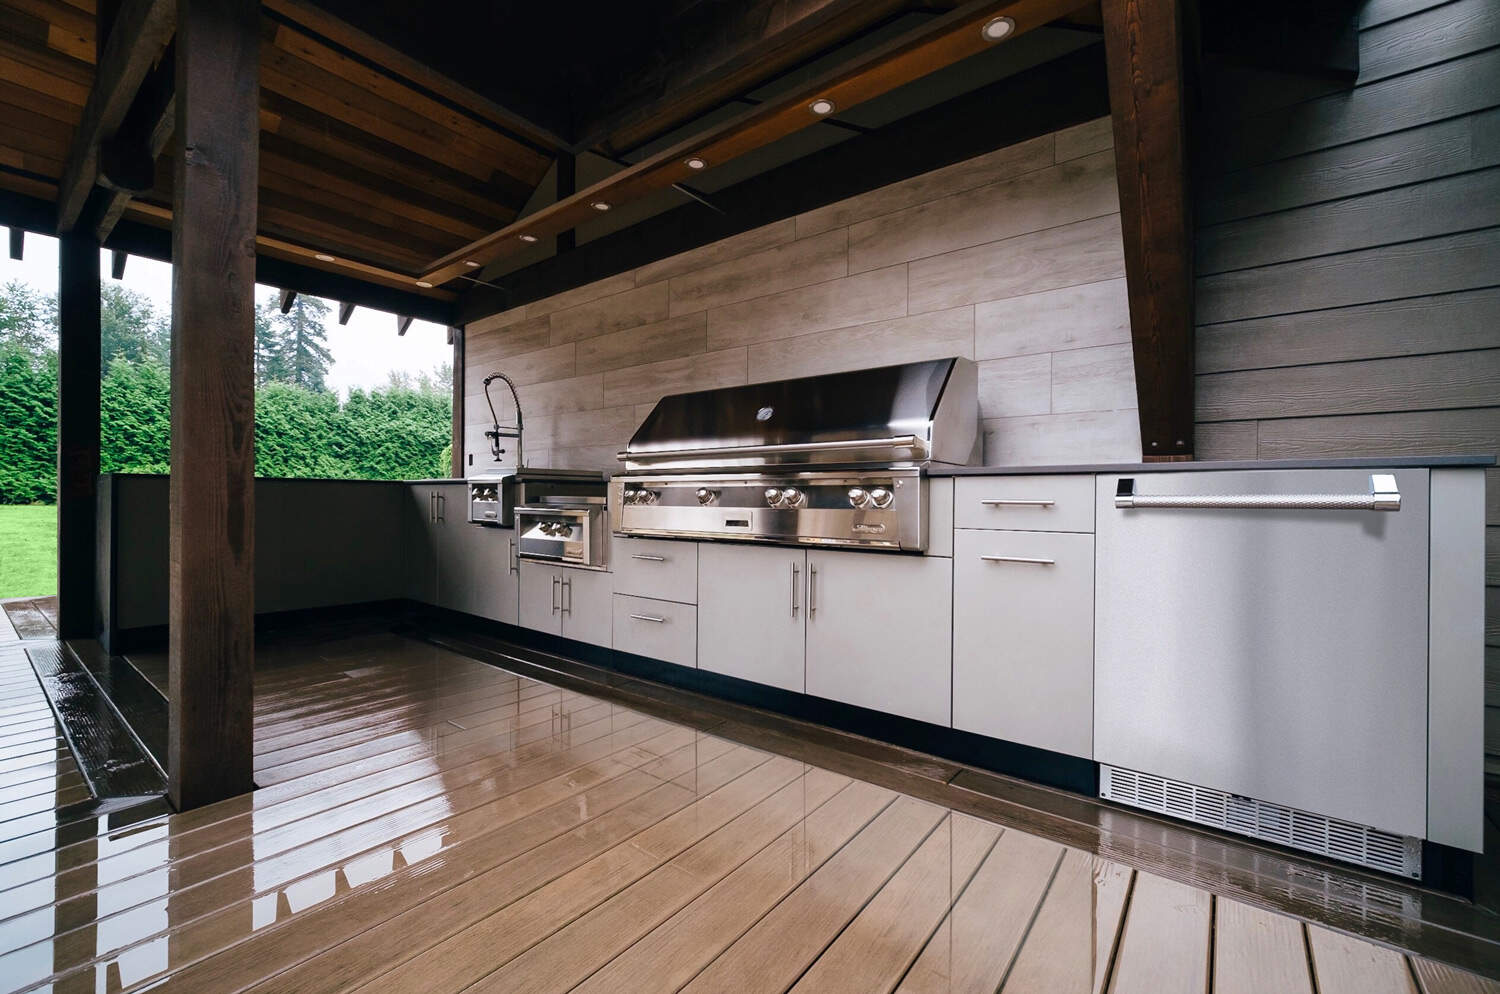 Why do you use stainless steel instead of plywood or particle board to make c...